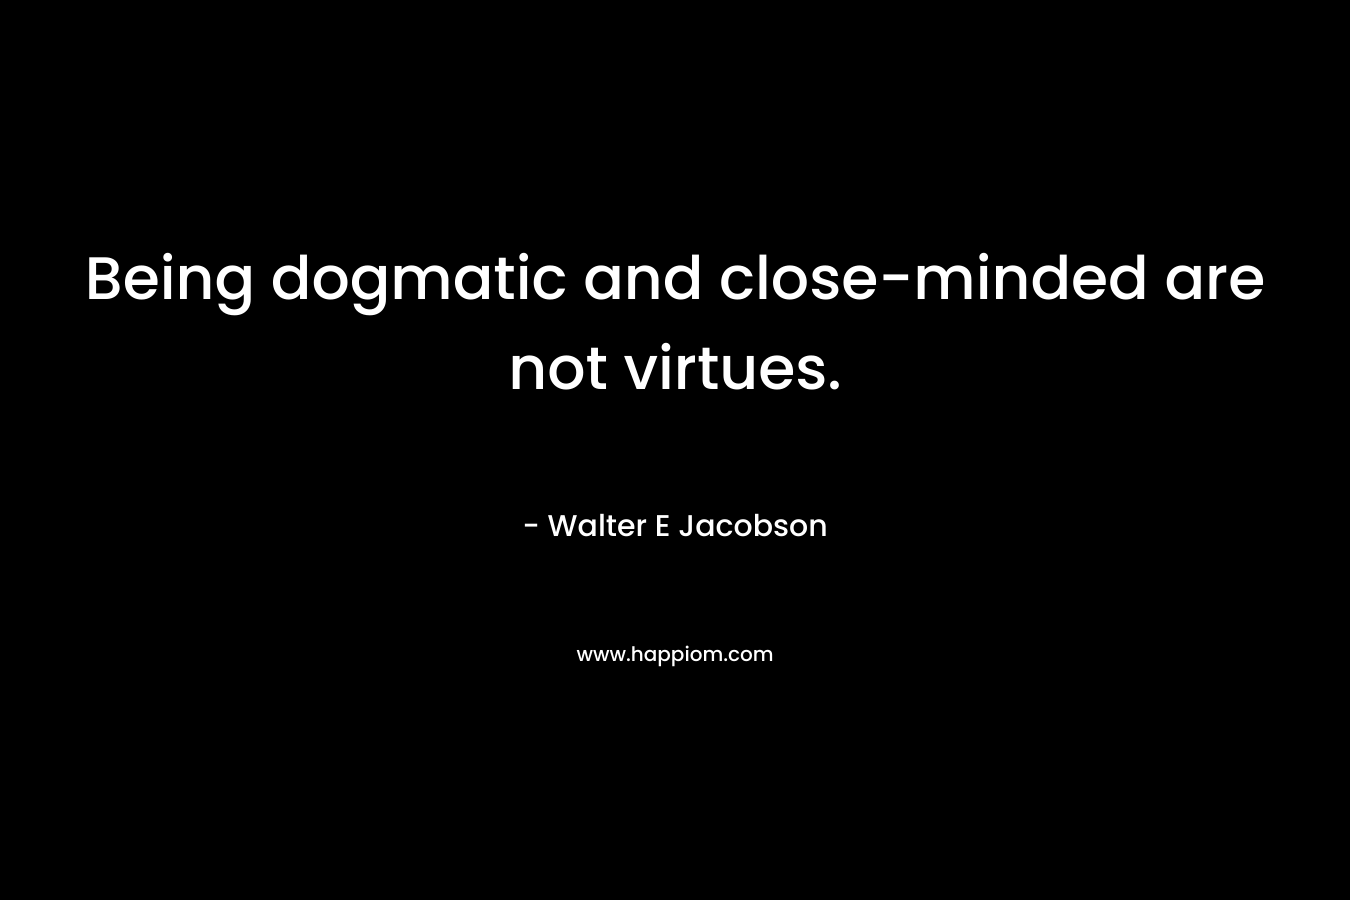 Being dogmatic and close-minded are not virtues.